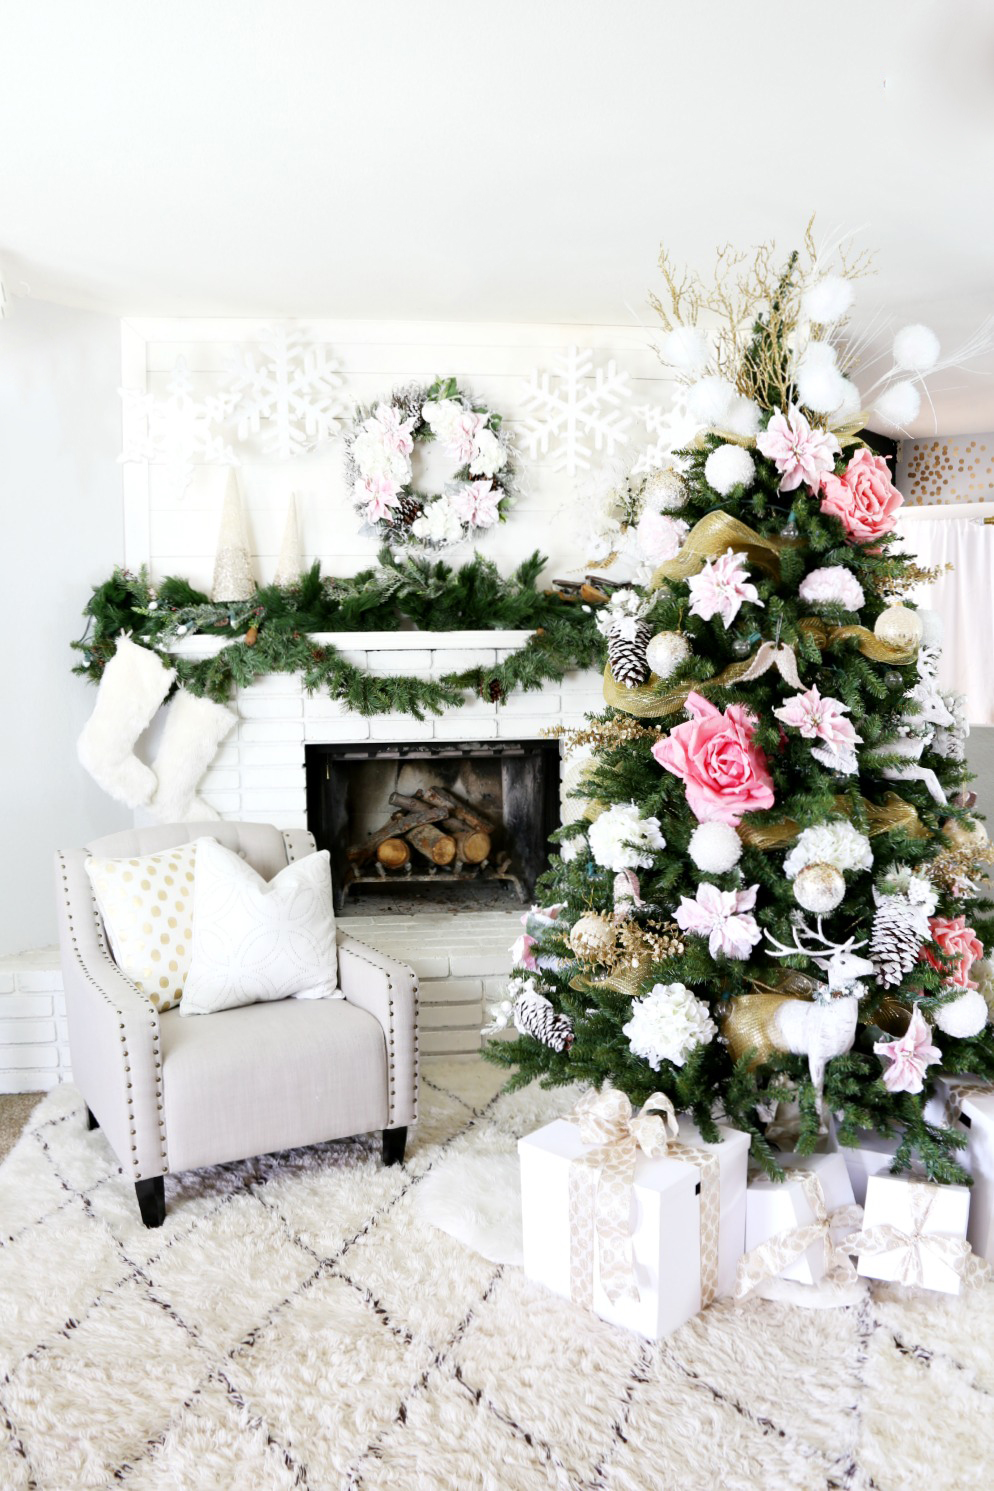 10 Inspiring Ideas How to Decorate Your Christmas Tree